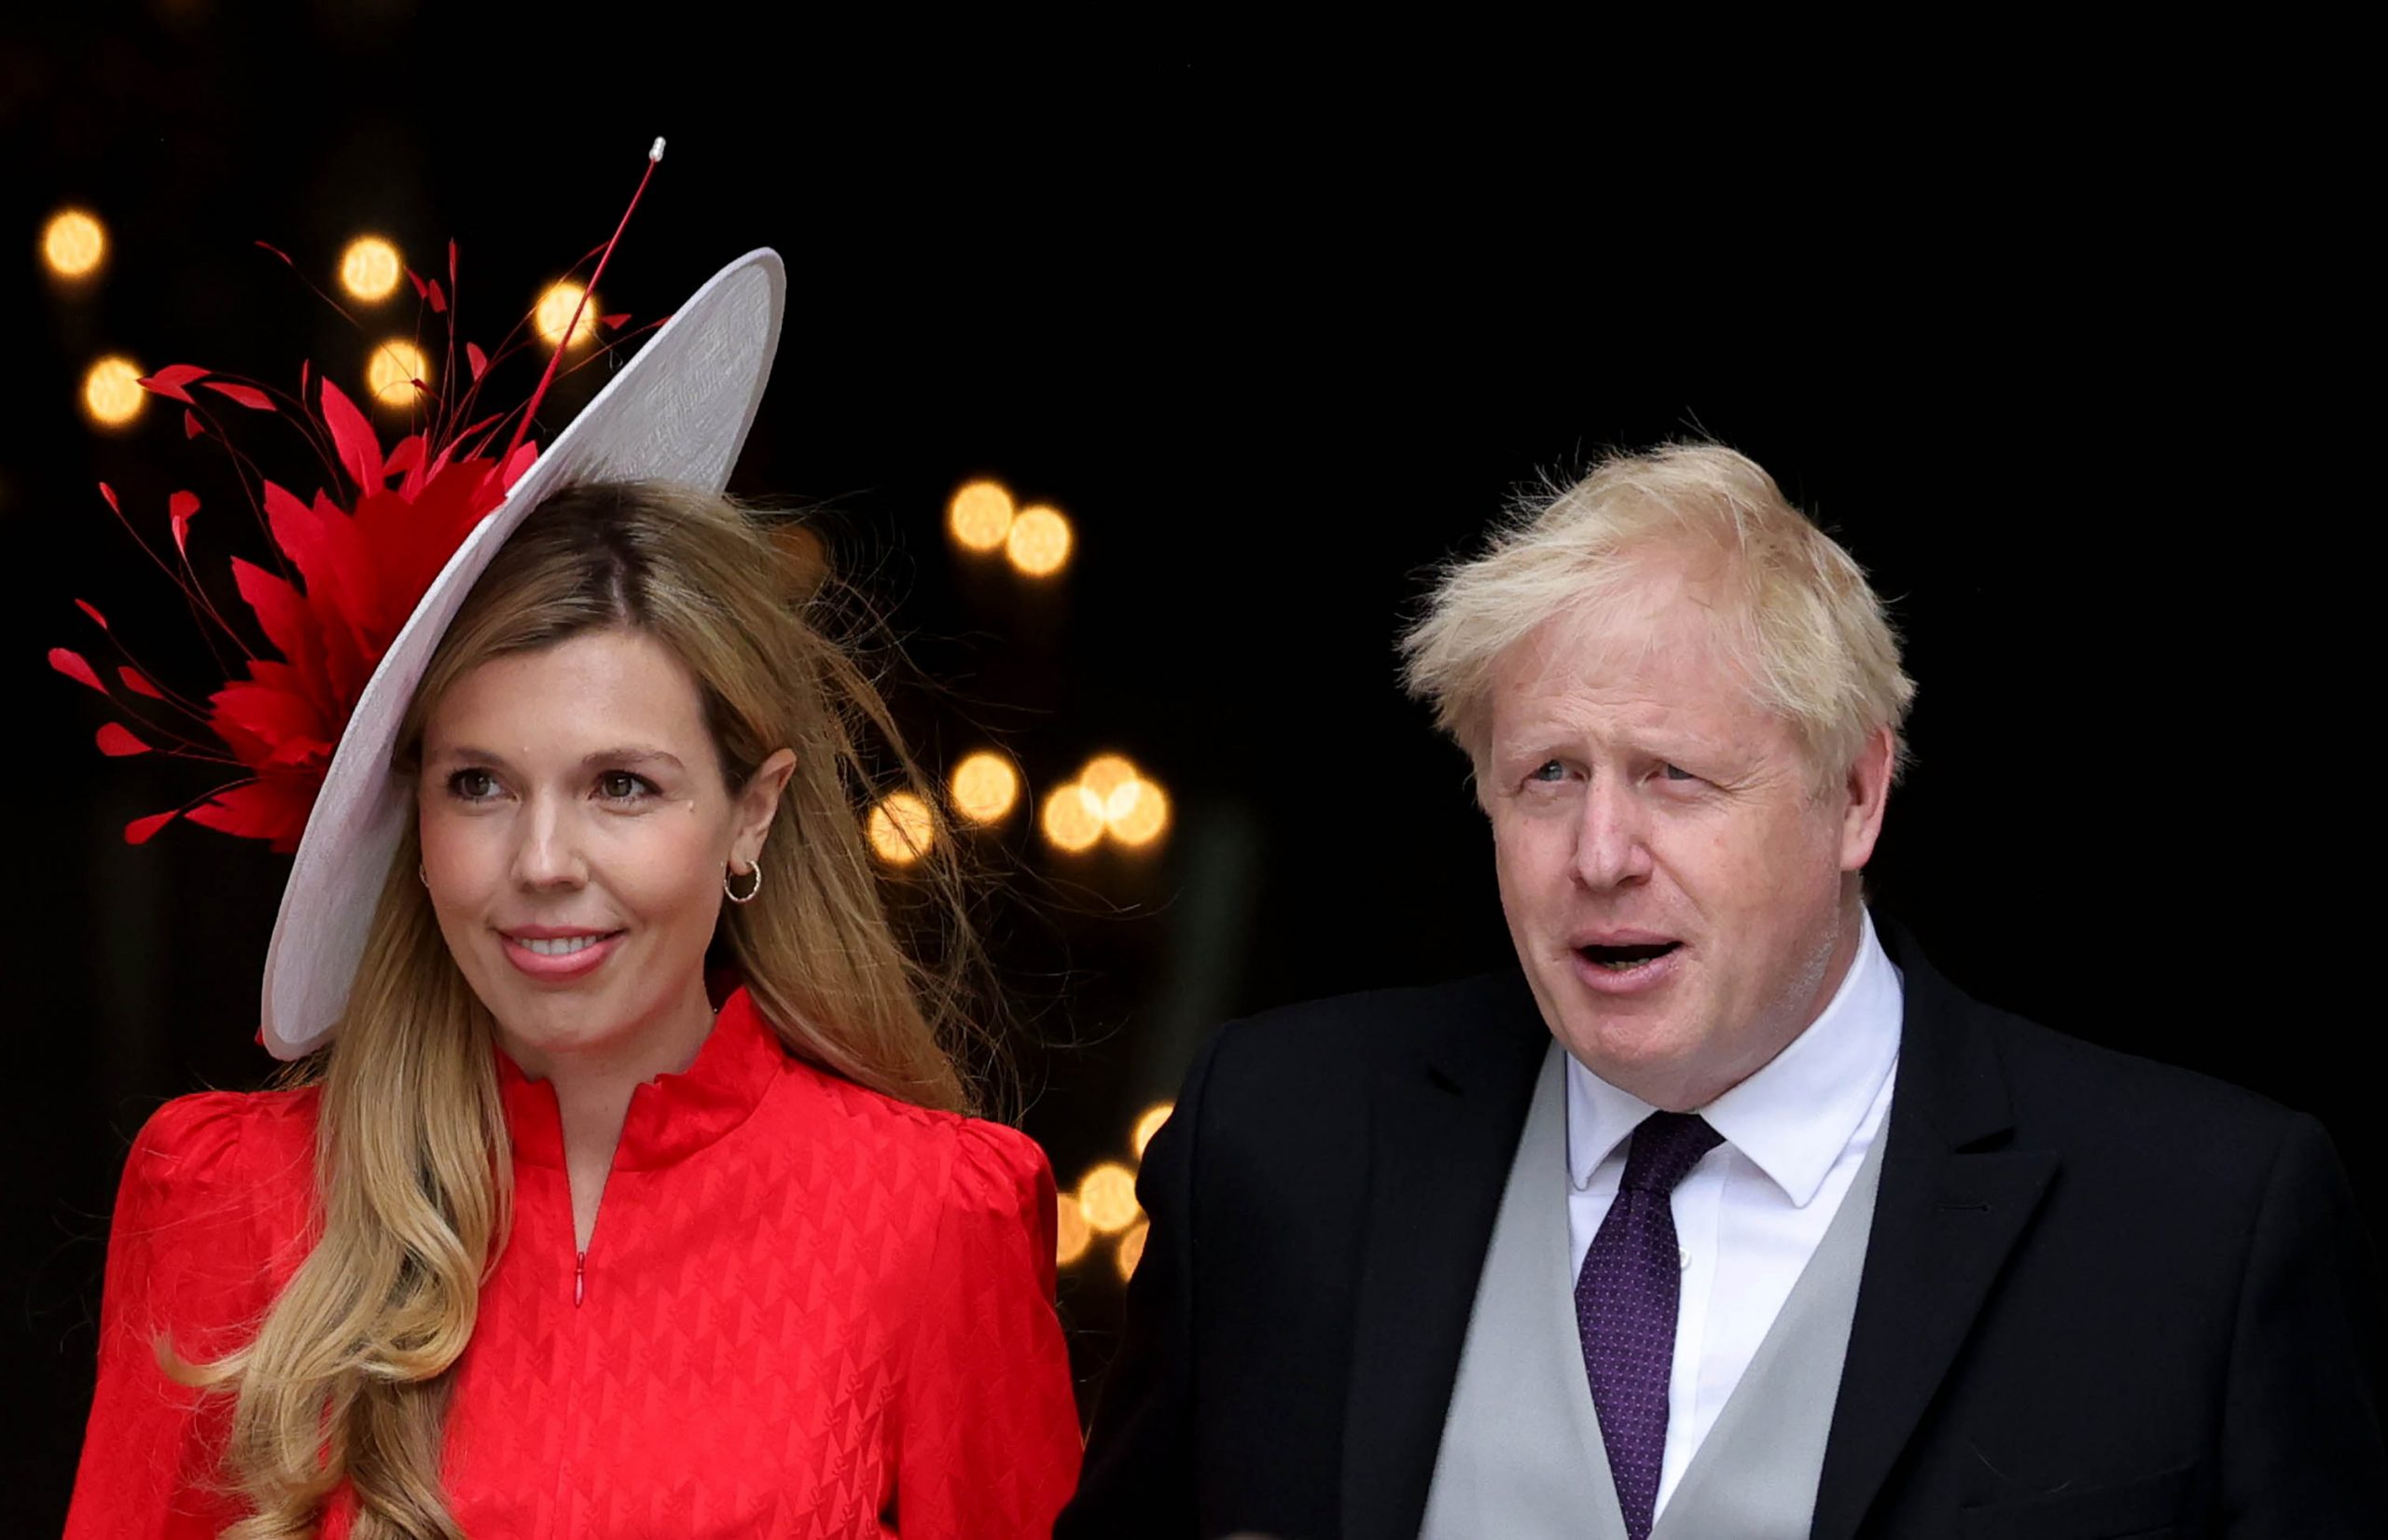 Five issues that led to the resignation of UK Prime Minister Boris Johnson